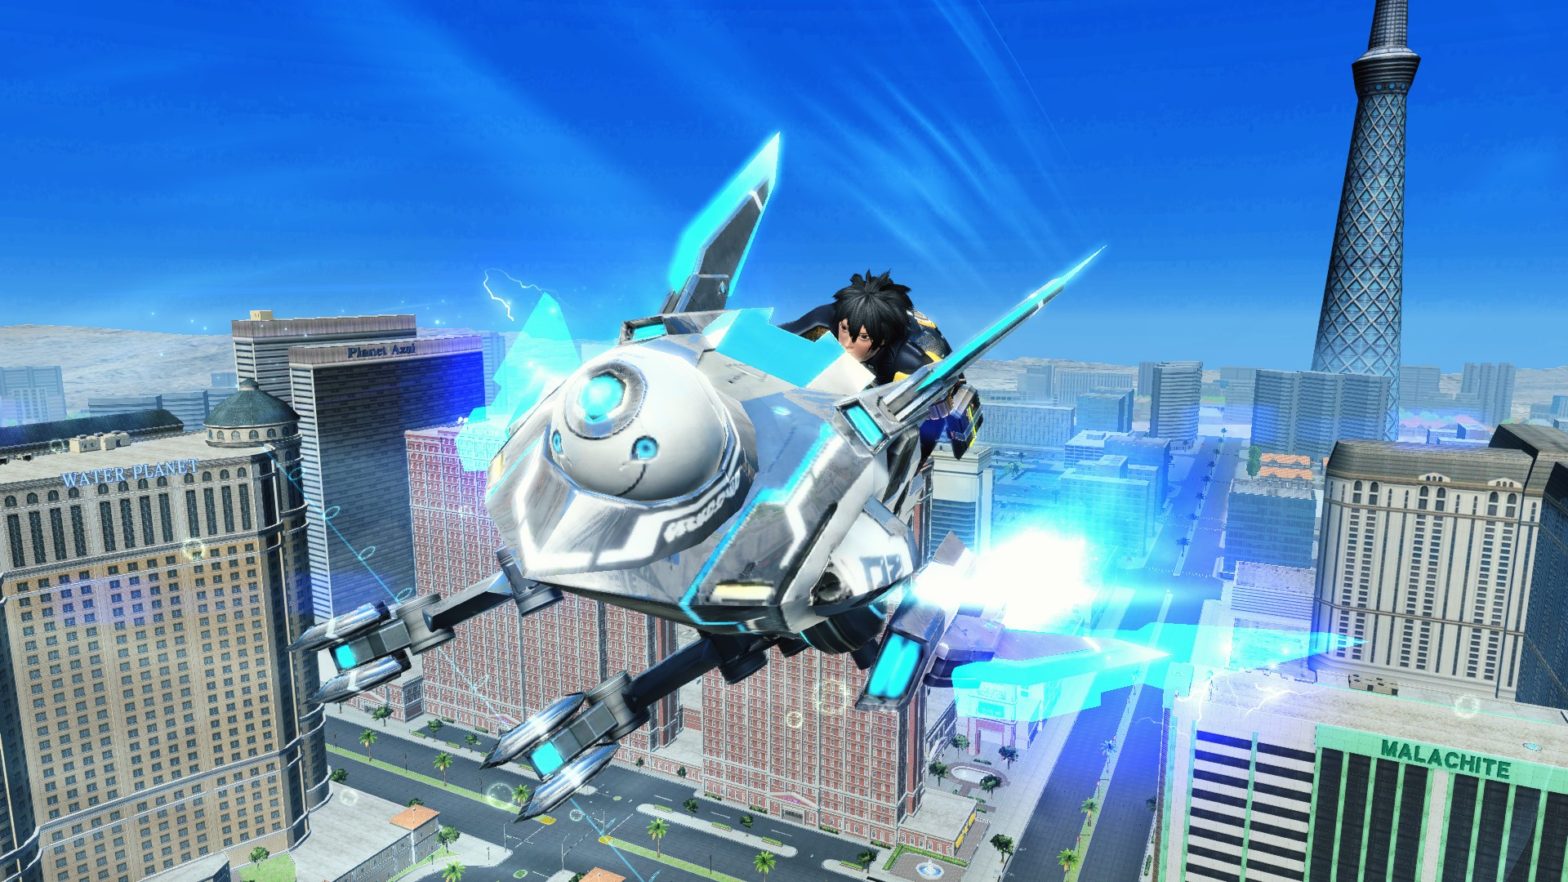 Phantasy Star Online 2 Reveals Episode 4 Content Update Launching In August